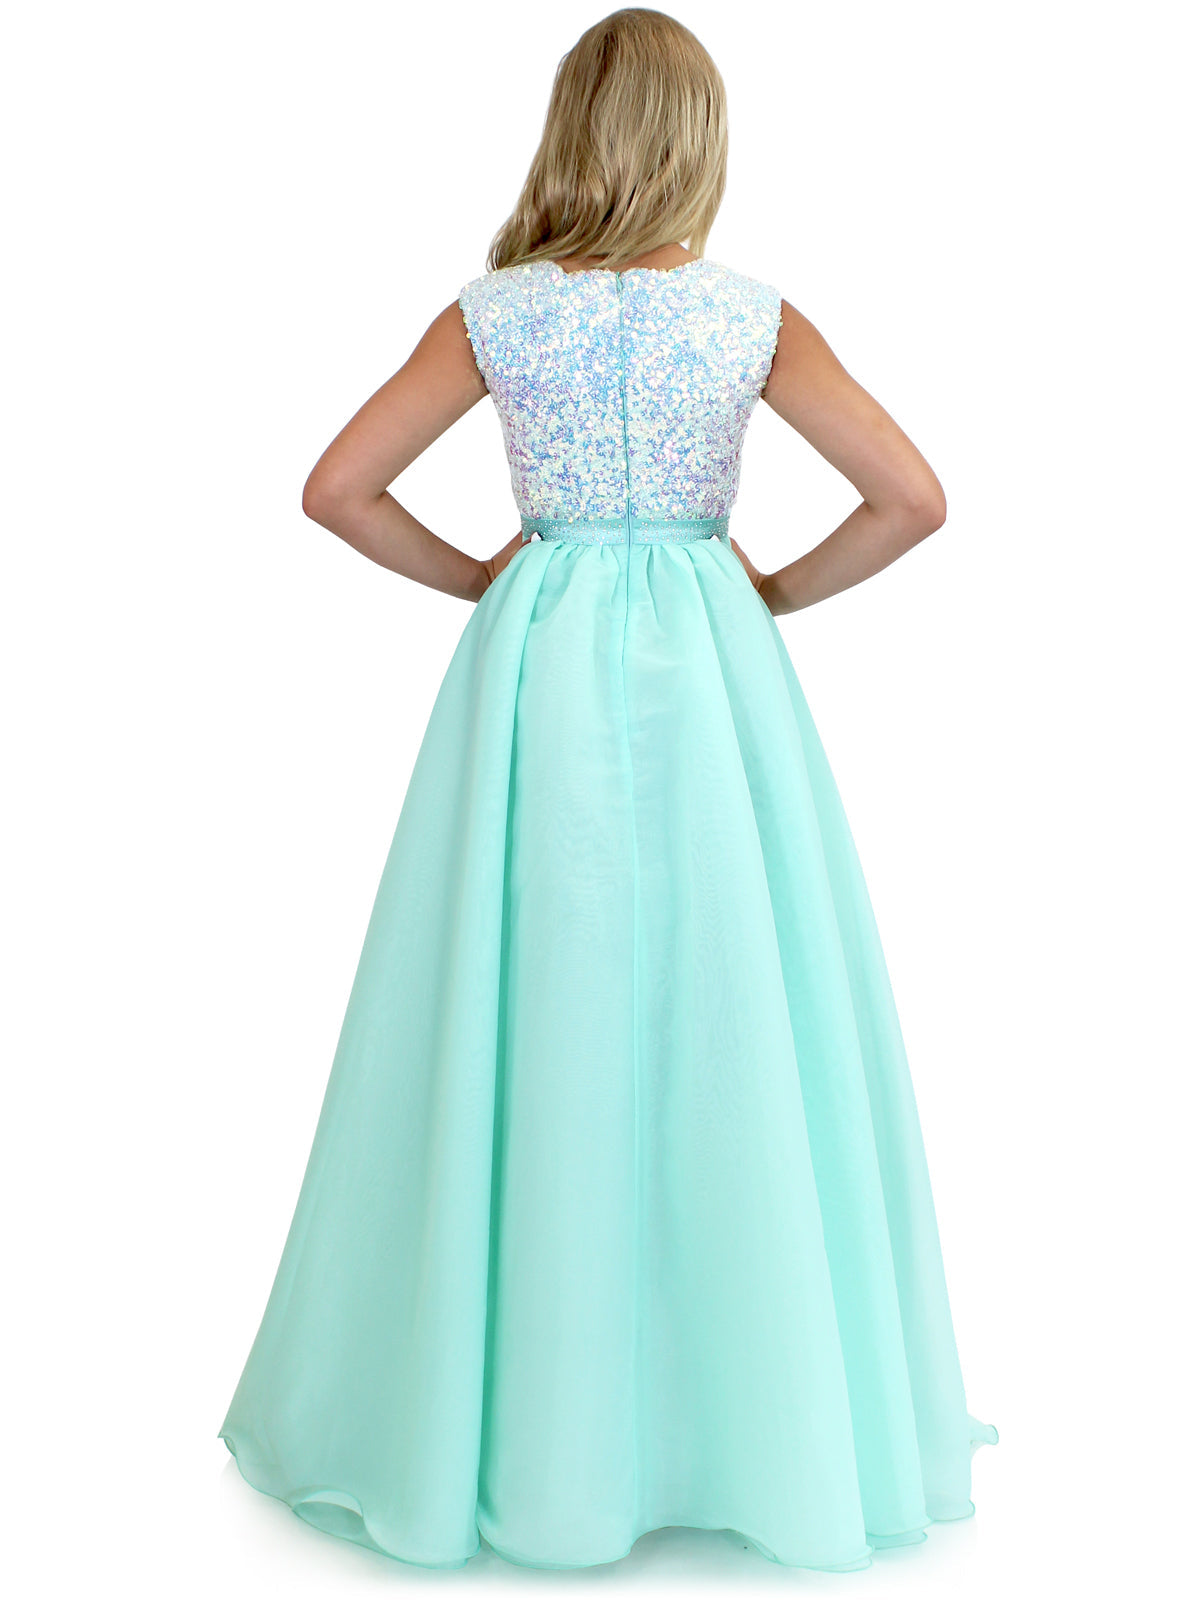 Marc Defang 5009 Long A Line Sequin Girls Ball Gown Pageant Dress Chiffon Kids  A classic classy perfect evening gown! Scallop shape necklines  Fully beaded top Hand crafted AB Crystals on the waistband  Organza skirt Center back invisible zippers  Fully lined  Available Sizes: 4-14  Available Colors: Royal Blue, Mint, White, Red  IF NOT IN STOCK PLEASE ALLOW 30 DAYS FOR DELIVERY!